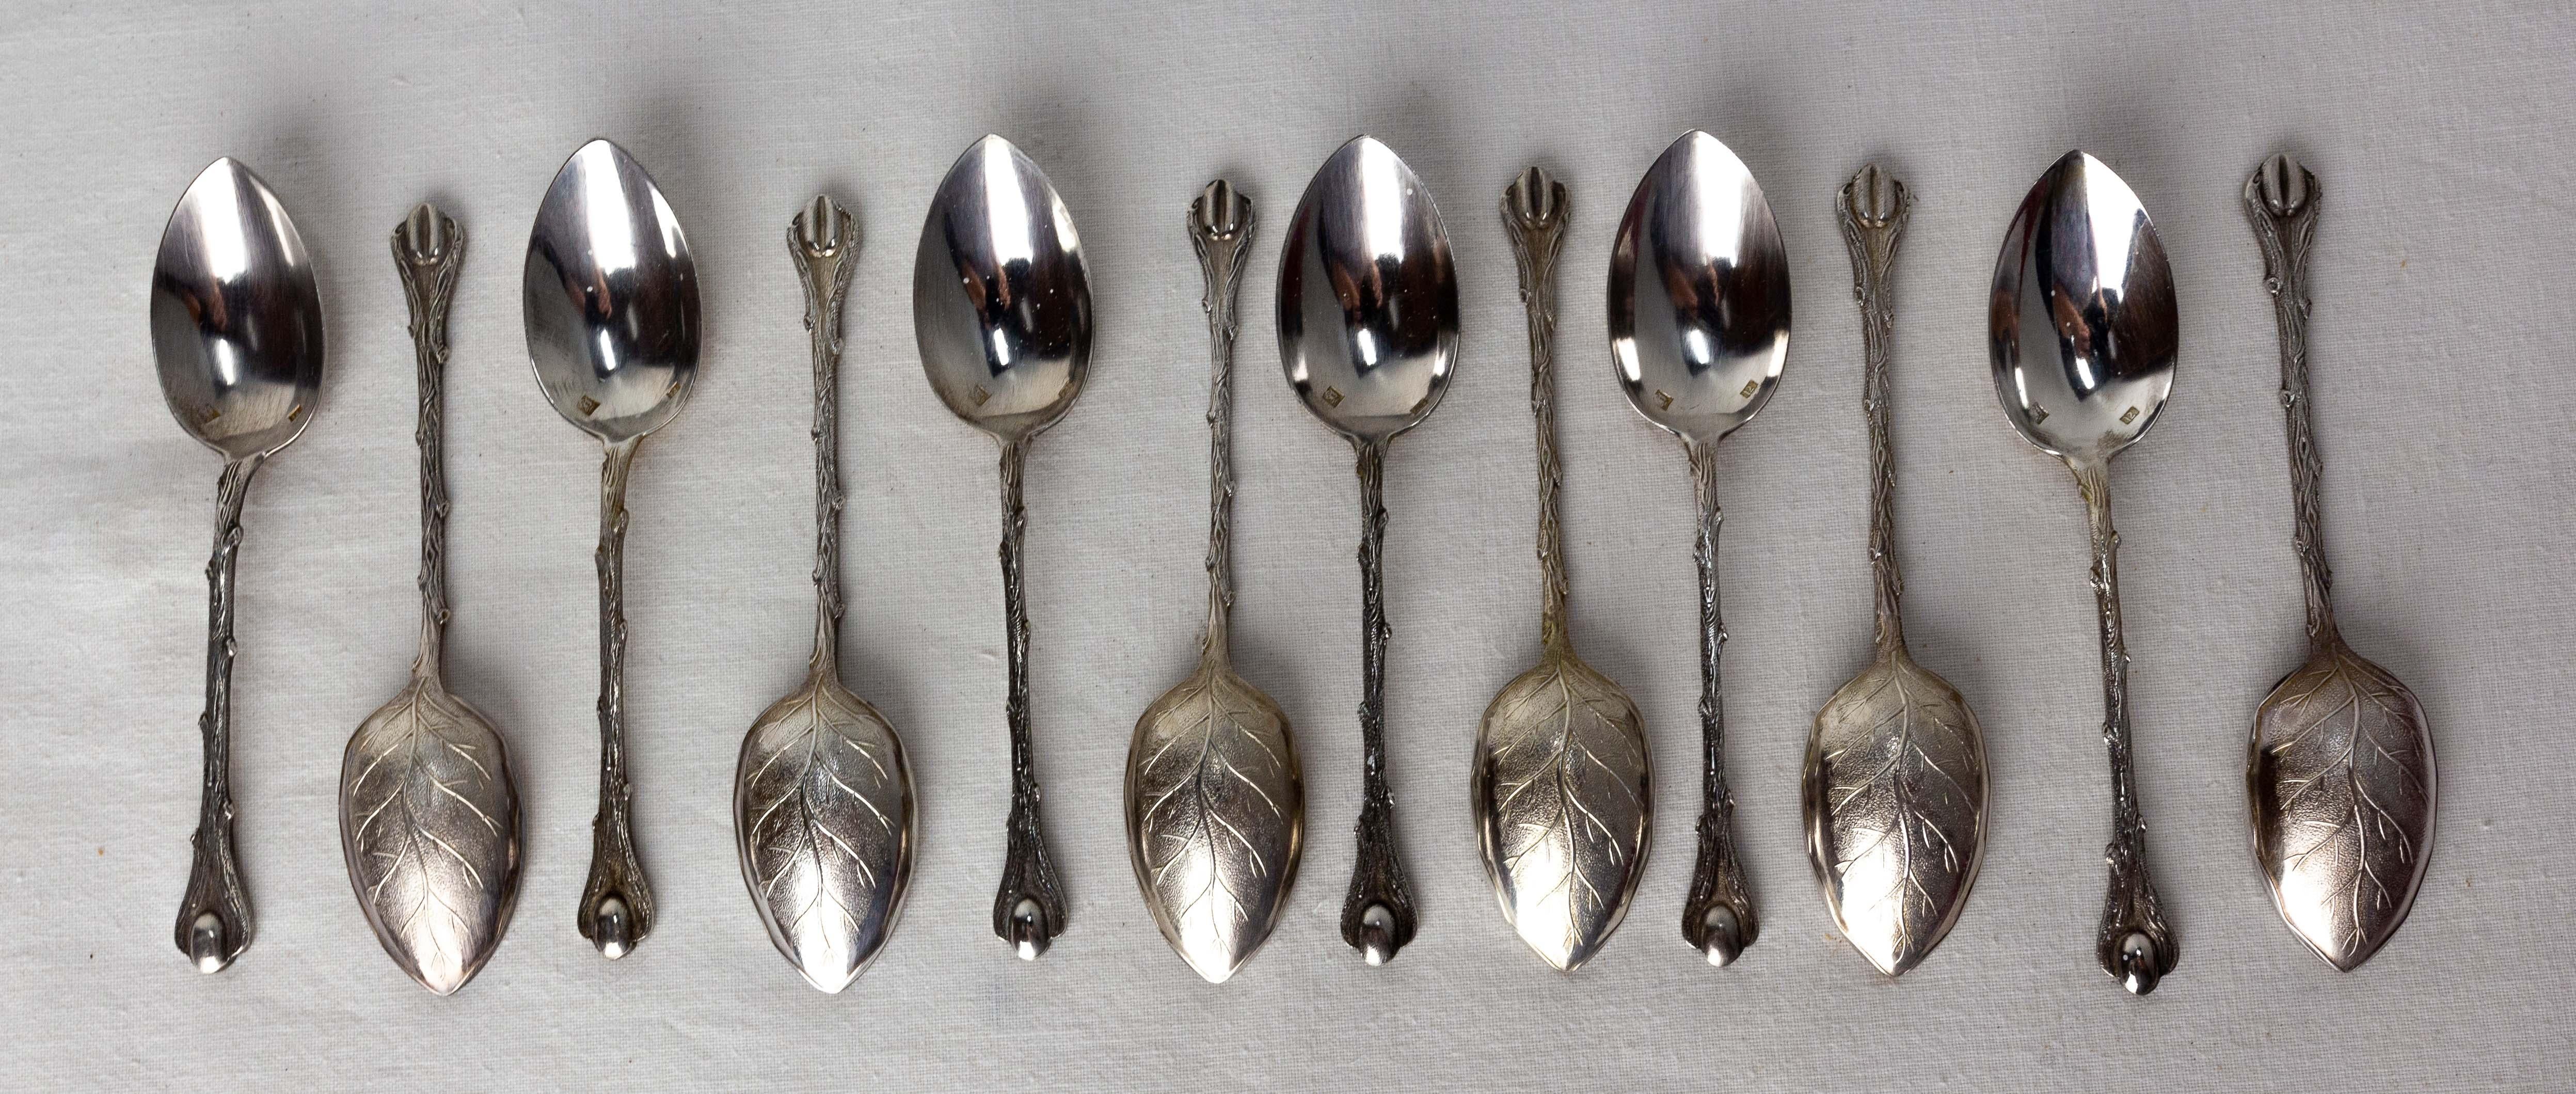 French silver metal set of twelve spoons
The back of each spoon represents a very well executed leaf whose details are seen as the ribs. The handles of the spoons are carved like twigs of branches.
Finally to remind the use of these mocha spoons a